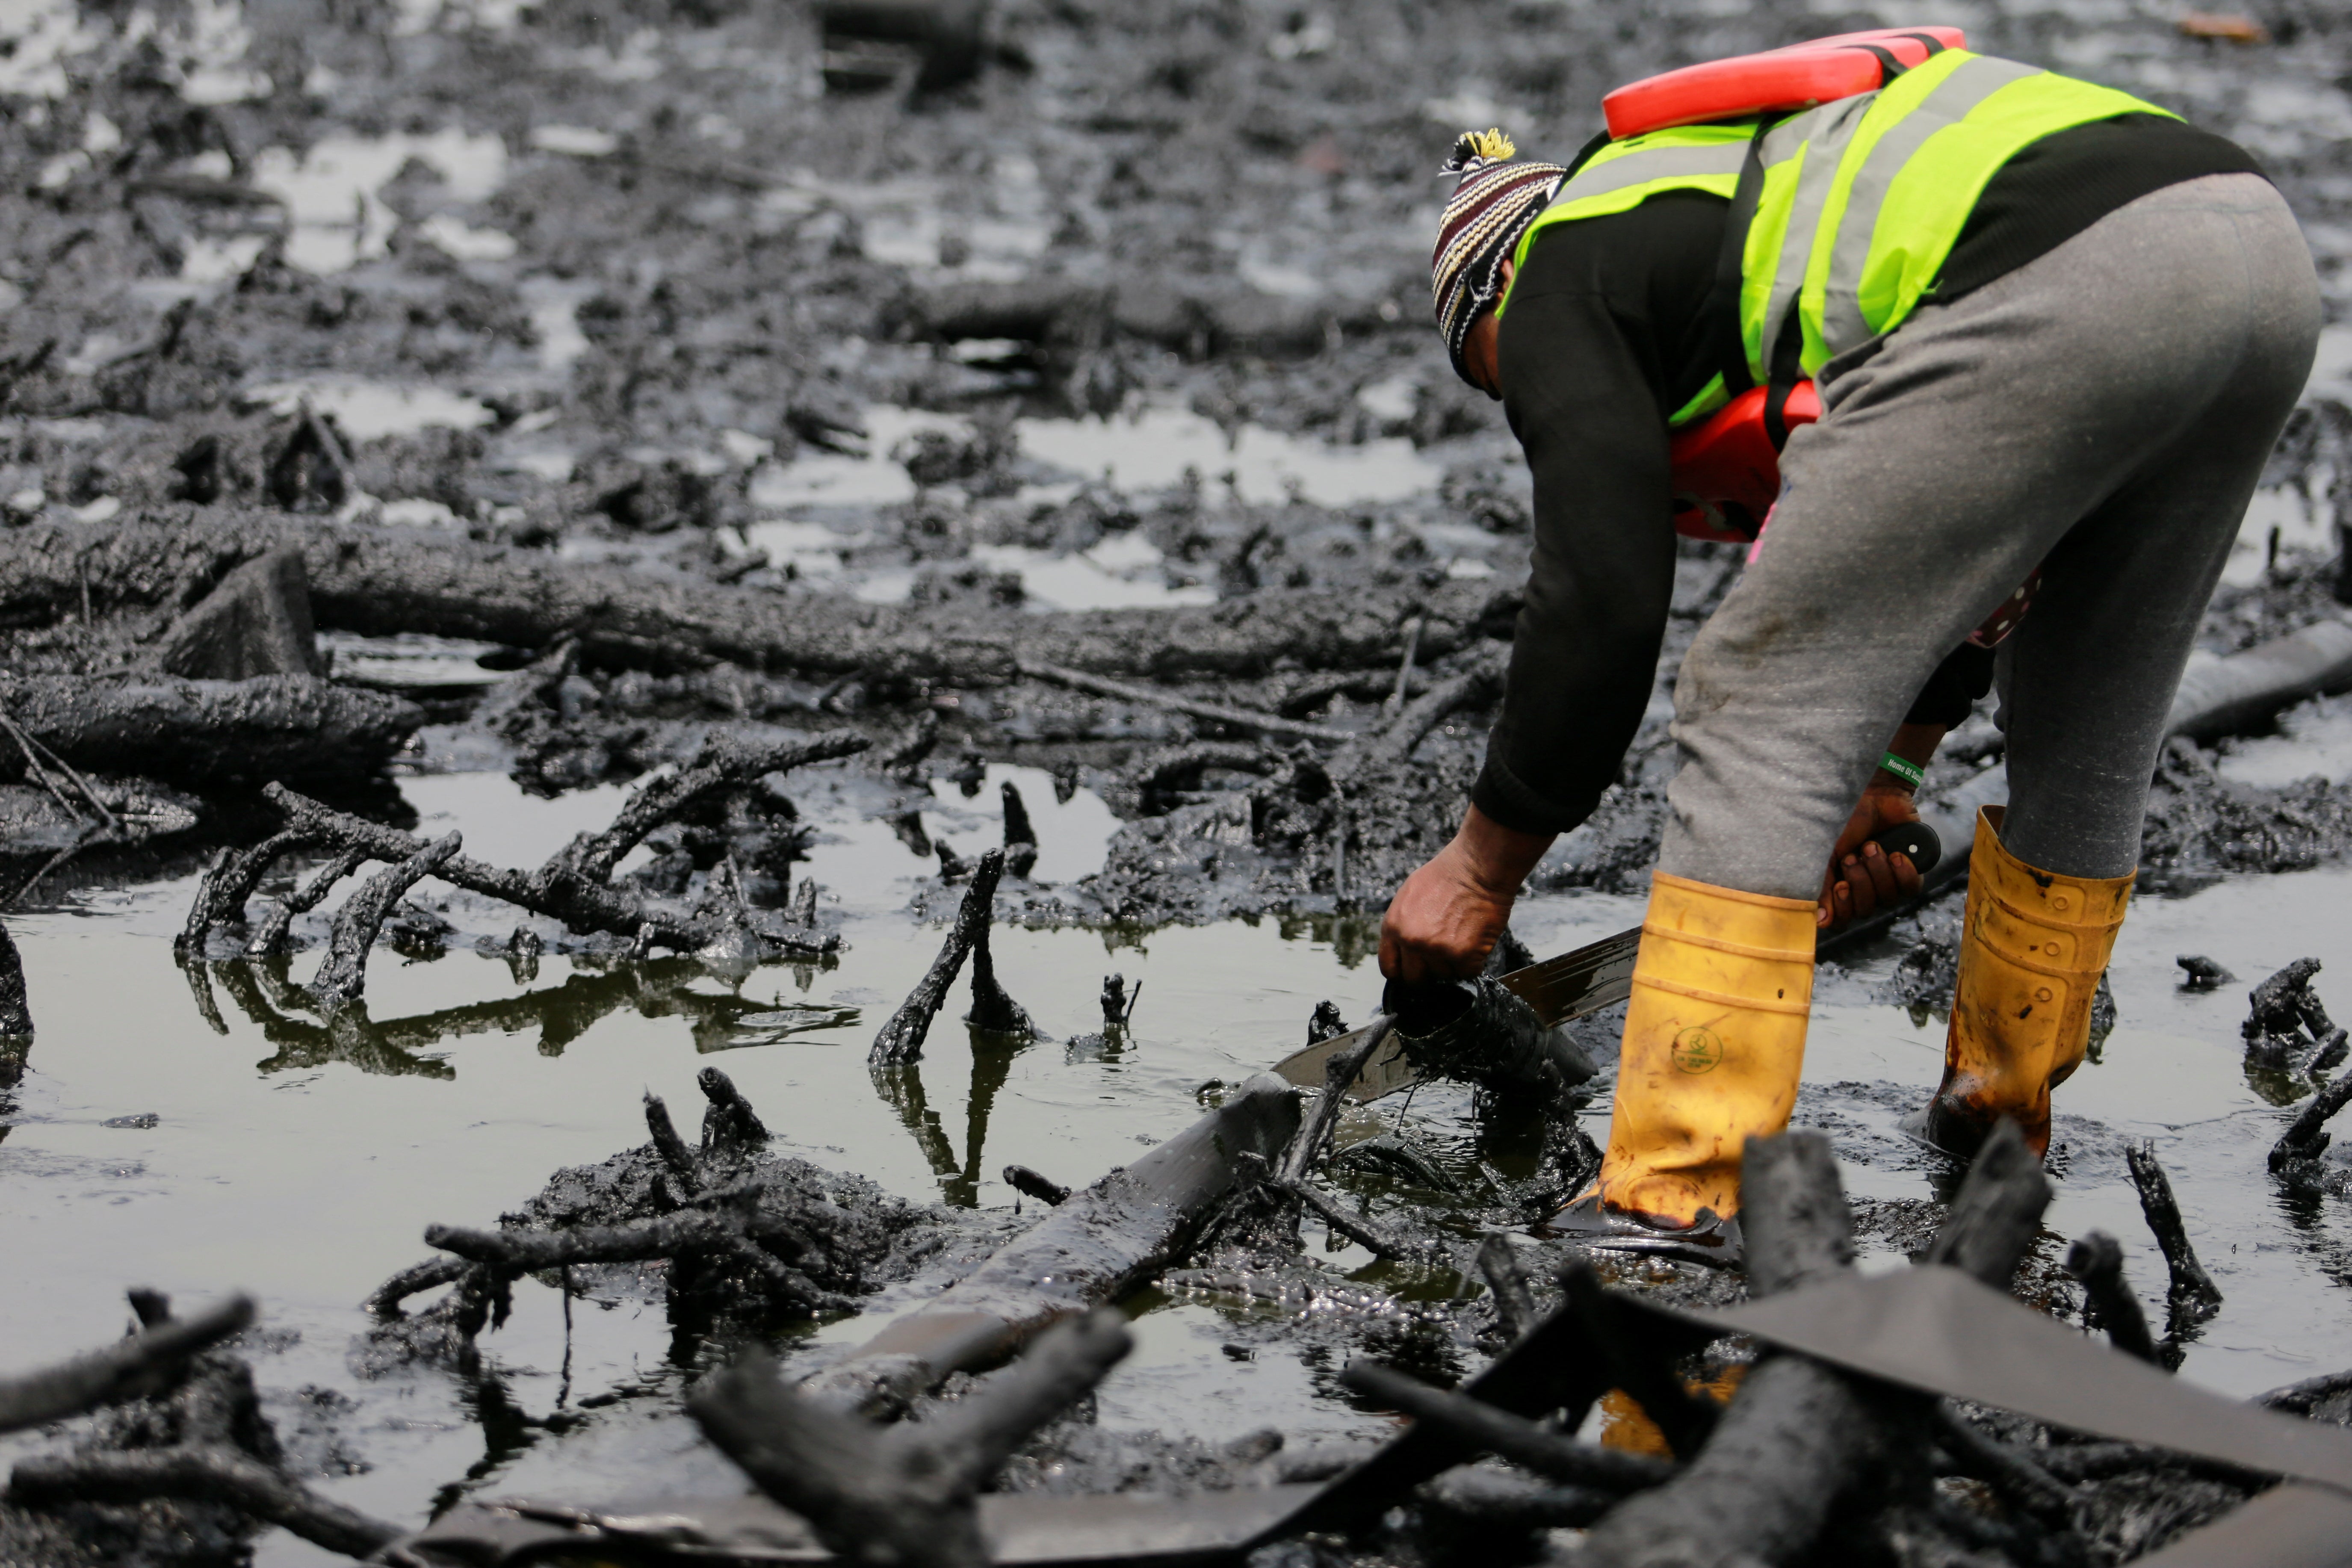 An oil spill from an illegal refinery in Nigeria’s Rivers state in January